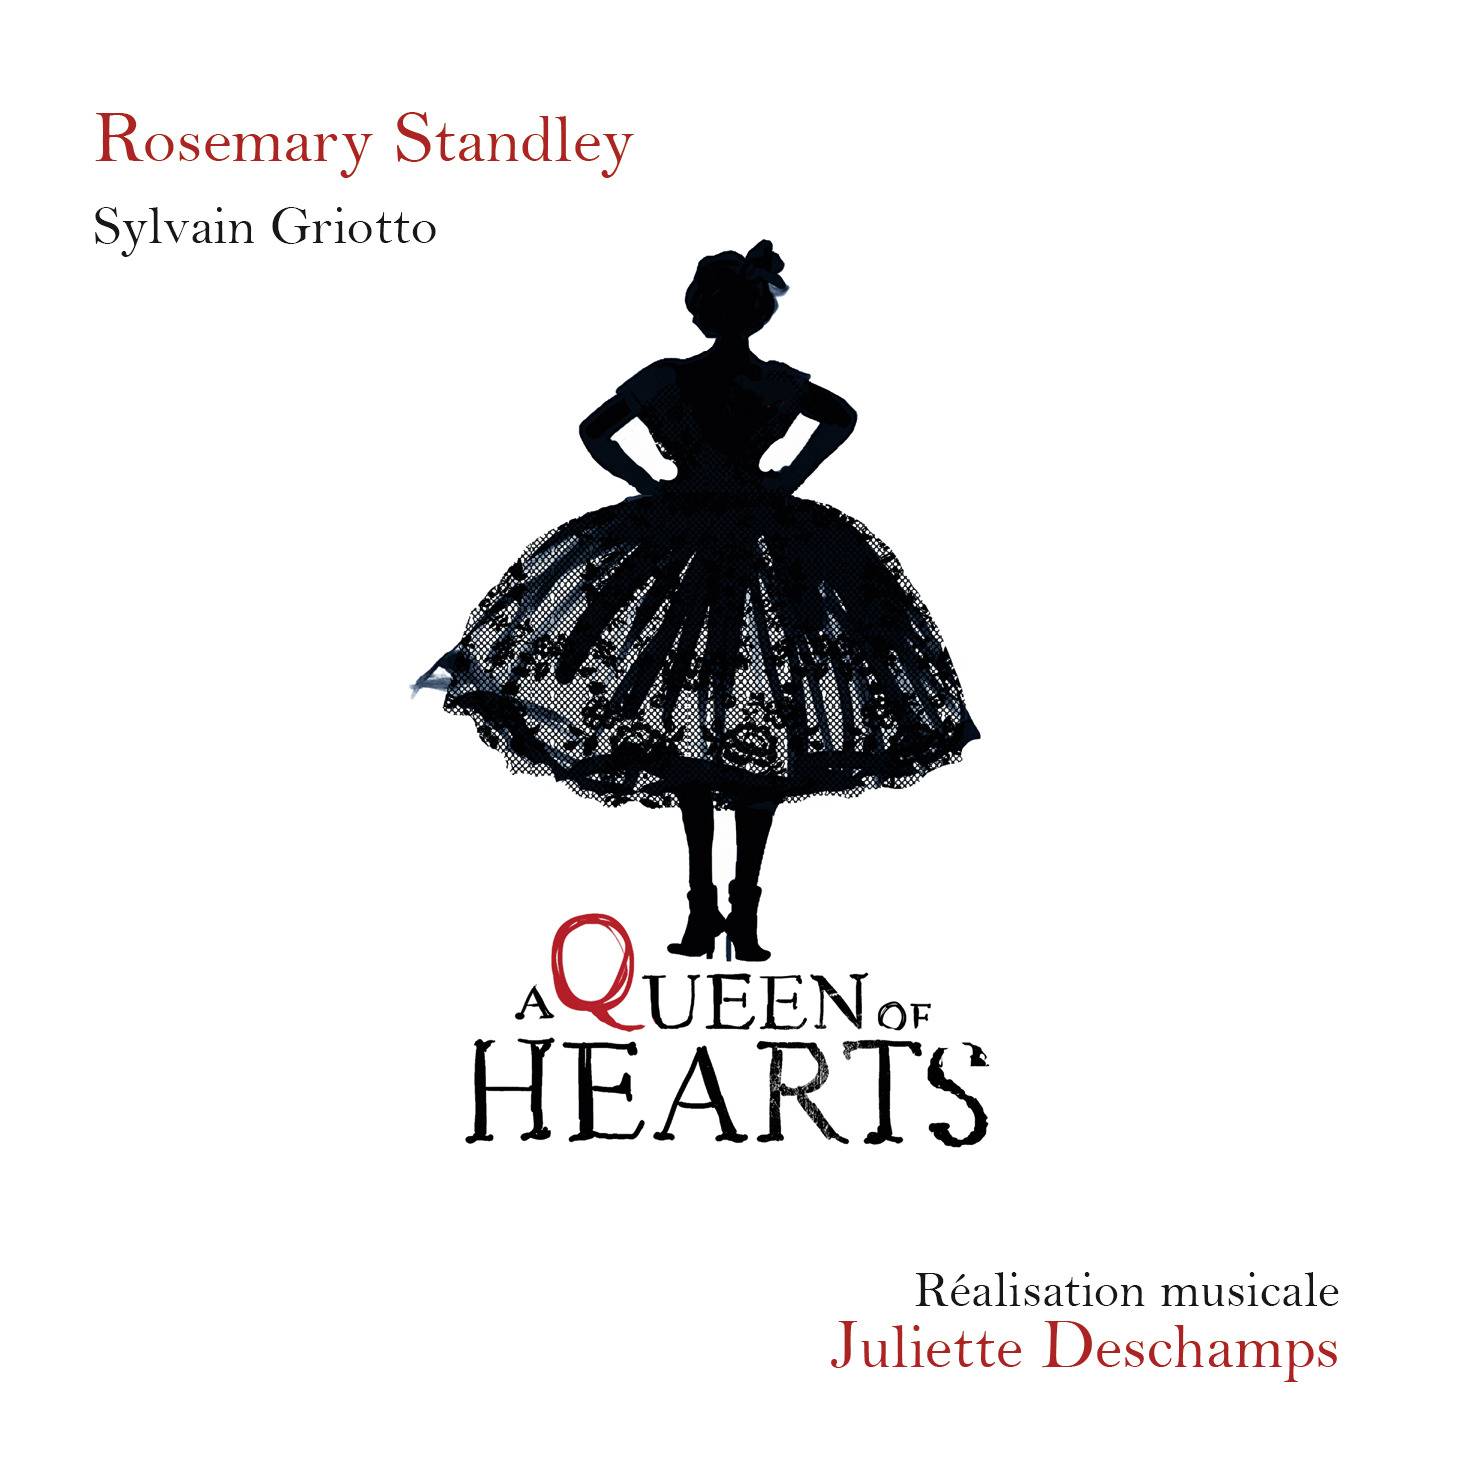 Rosemary Standley & Sylvain Griotto - A Queen Of Hearts (2016) [FLAC 24bit/88,2kHz]